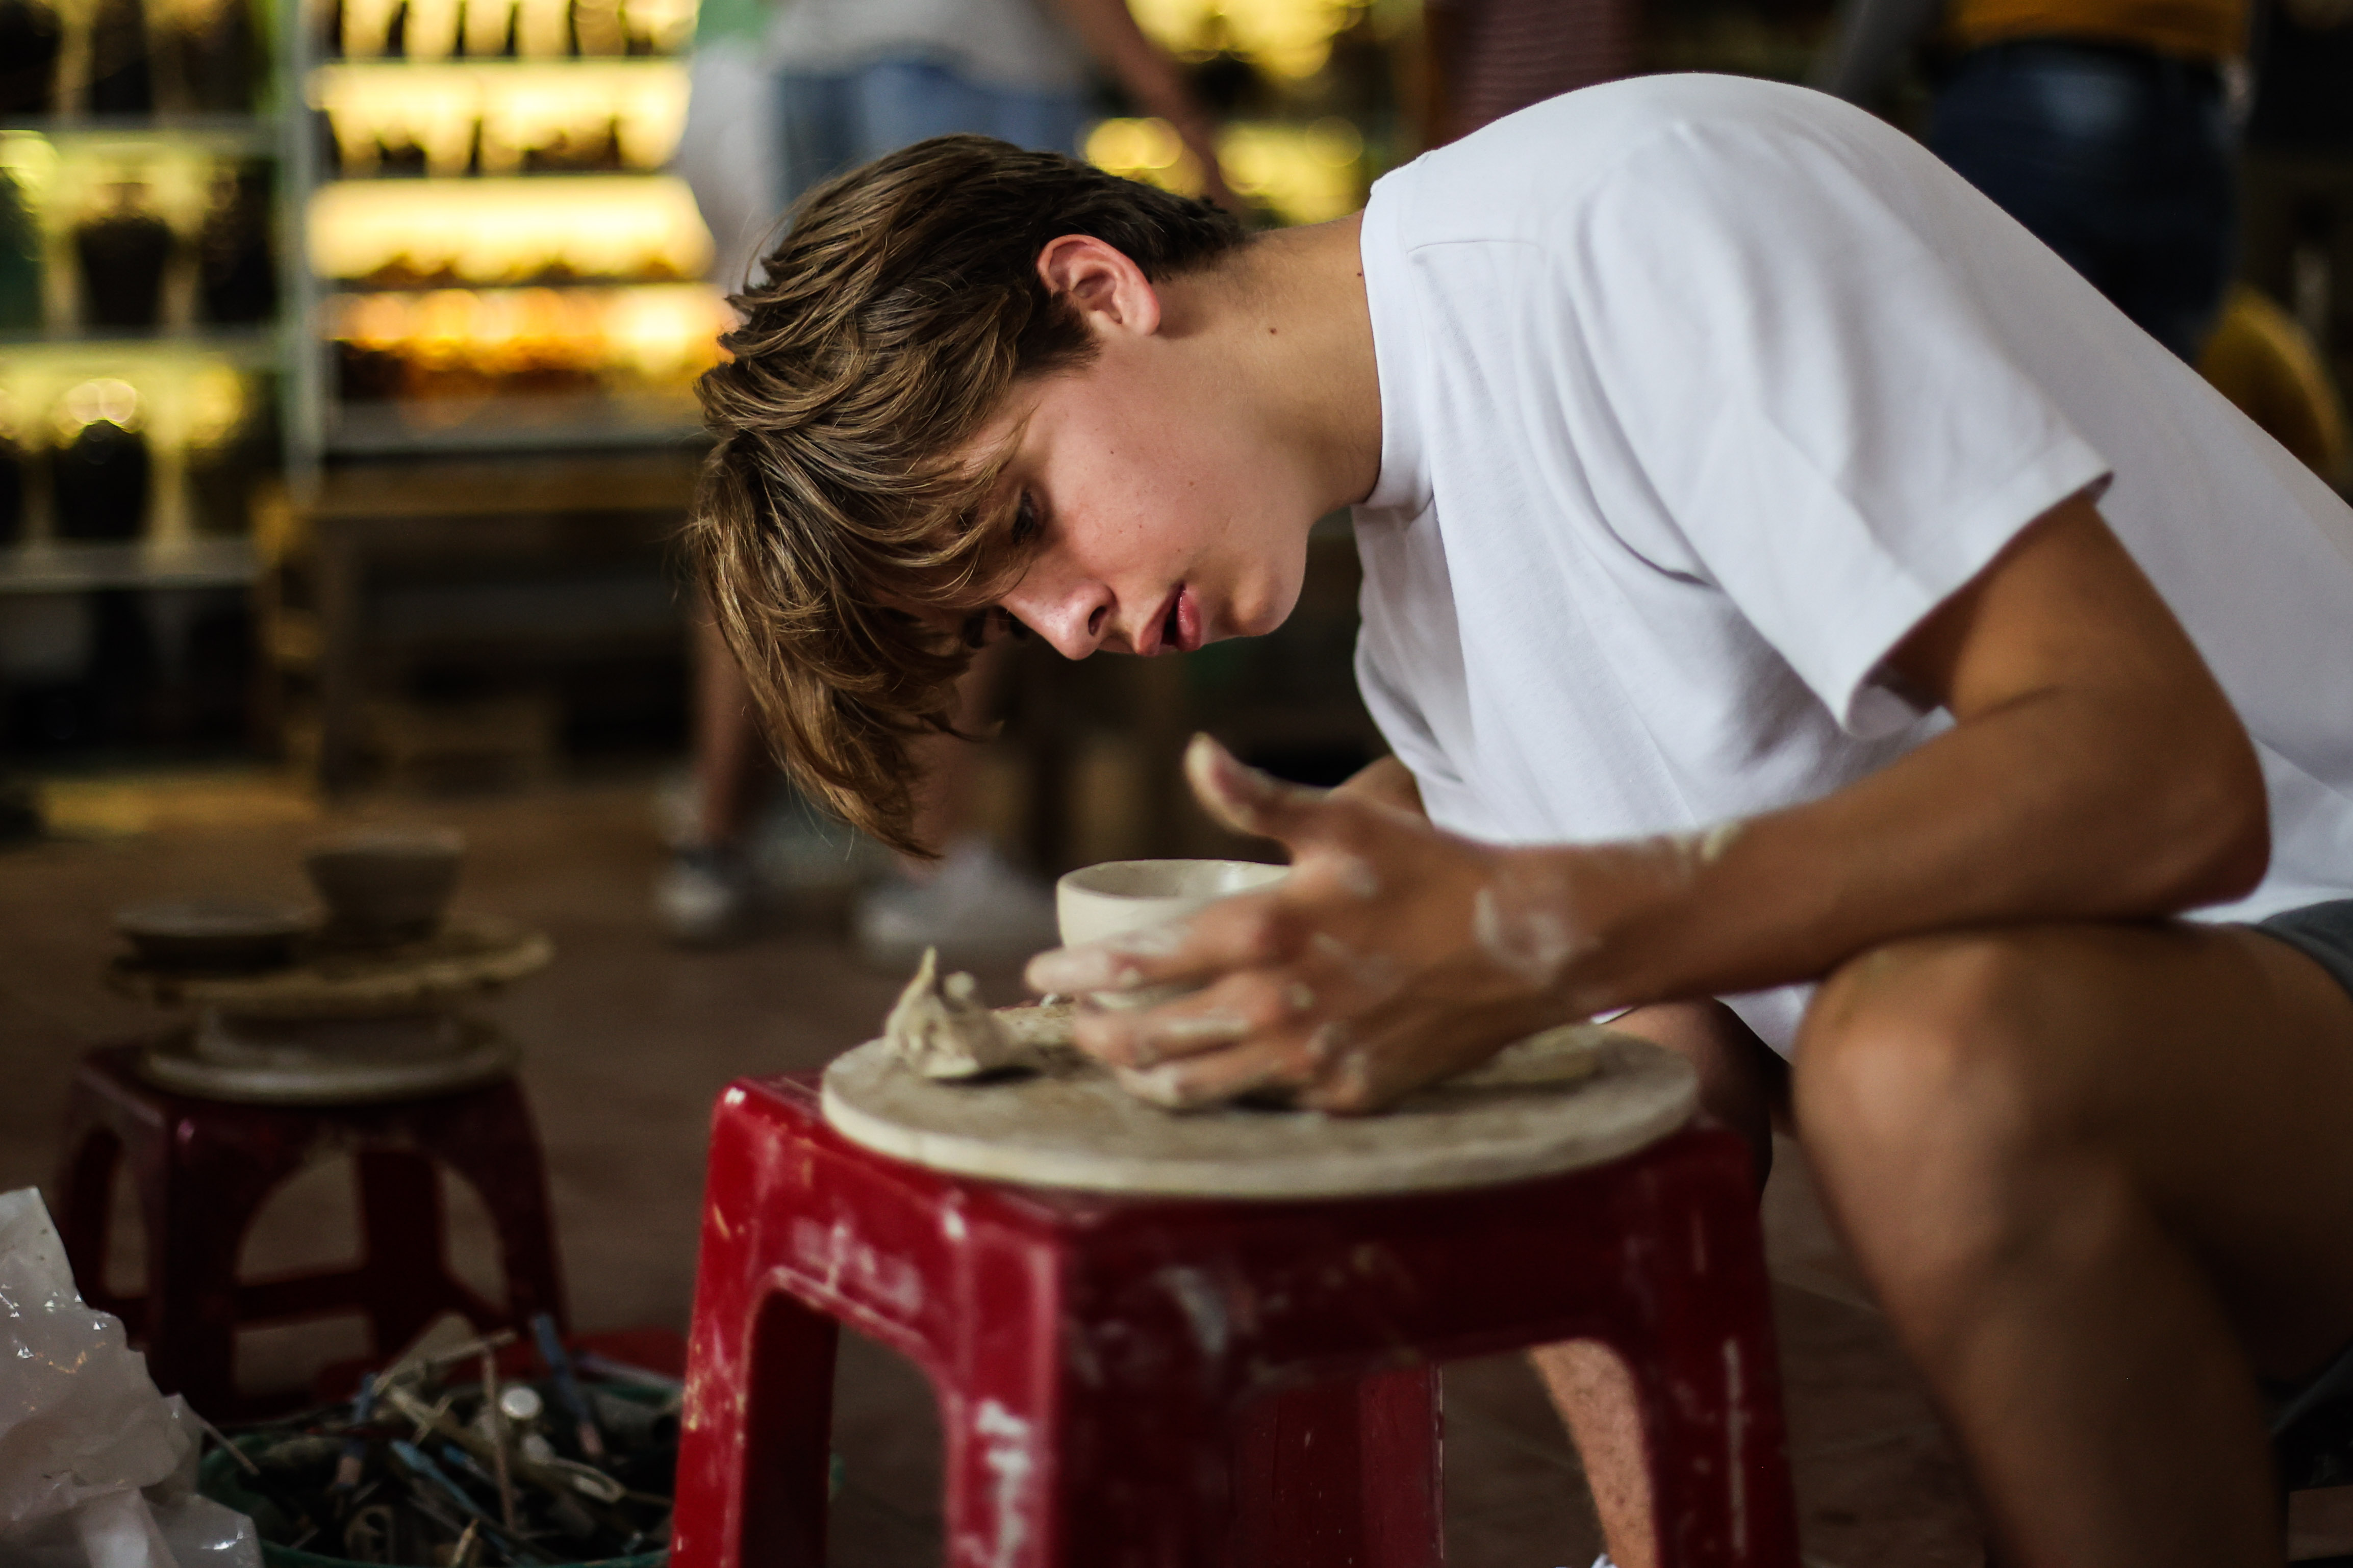 A foreign tourist tries to make a pottery product while visiting Thanh Ha Pottery Village, Thanh Ha Ward, Hoi An City, Quang Nam Province. Photo: Nguyen Khanh / Tuoi Tre